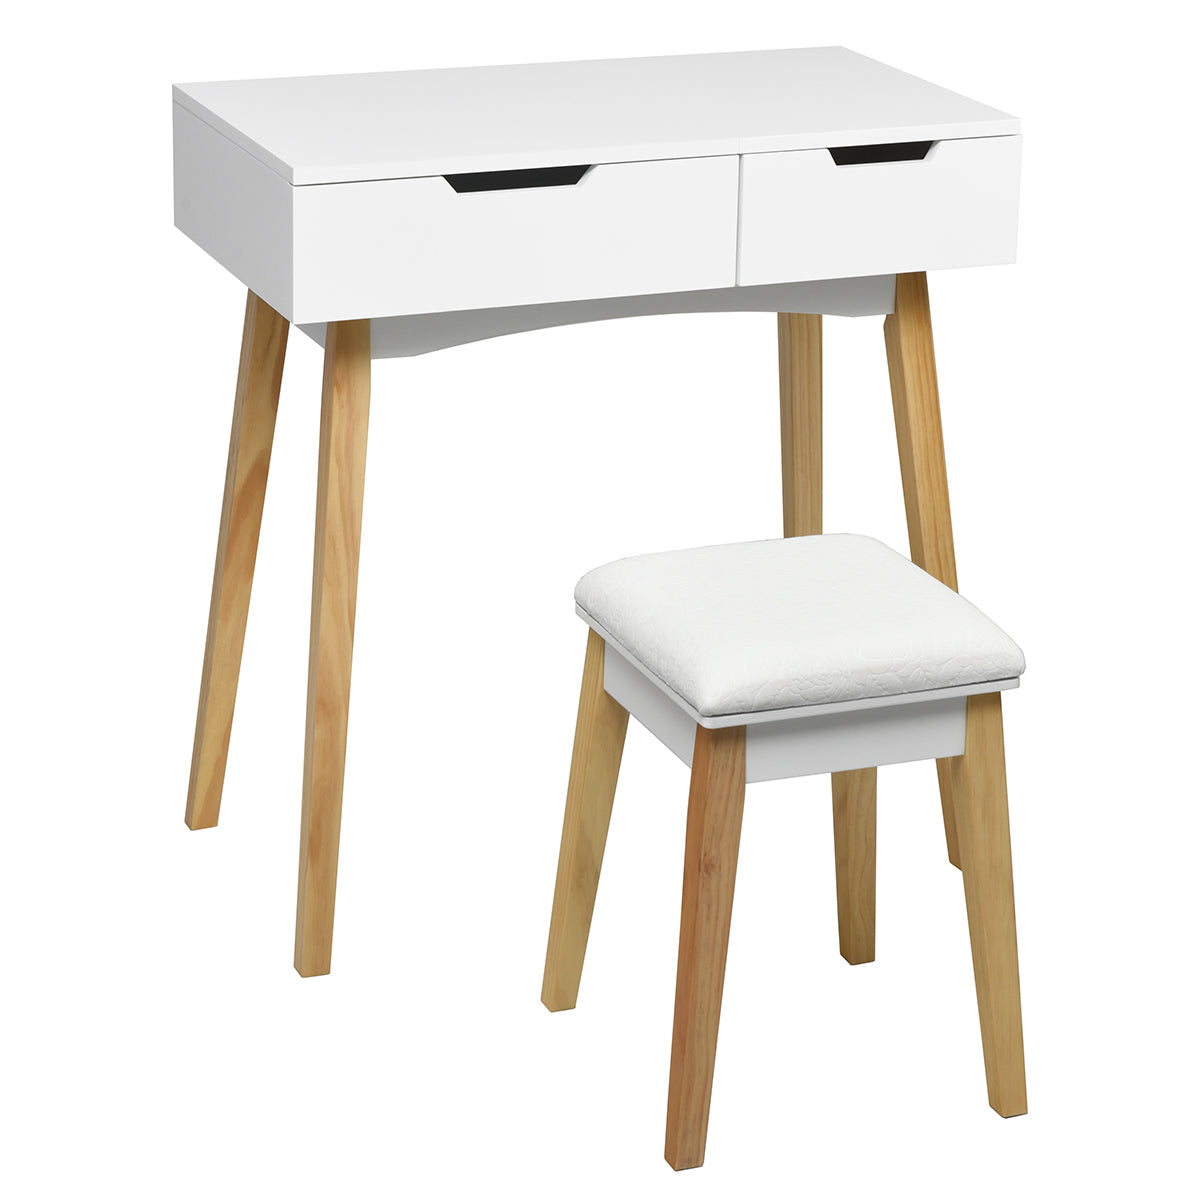 CHARMAID Vanity Table with Flip Top Mirror and Cushioned Stool, White - Giantexus